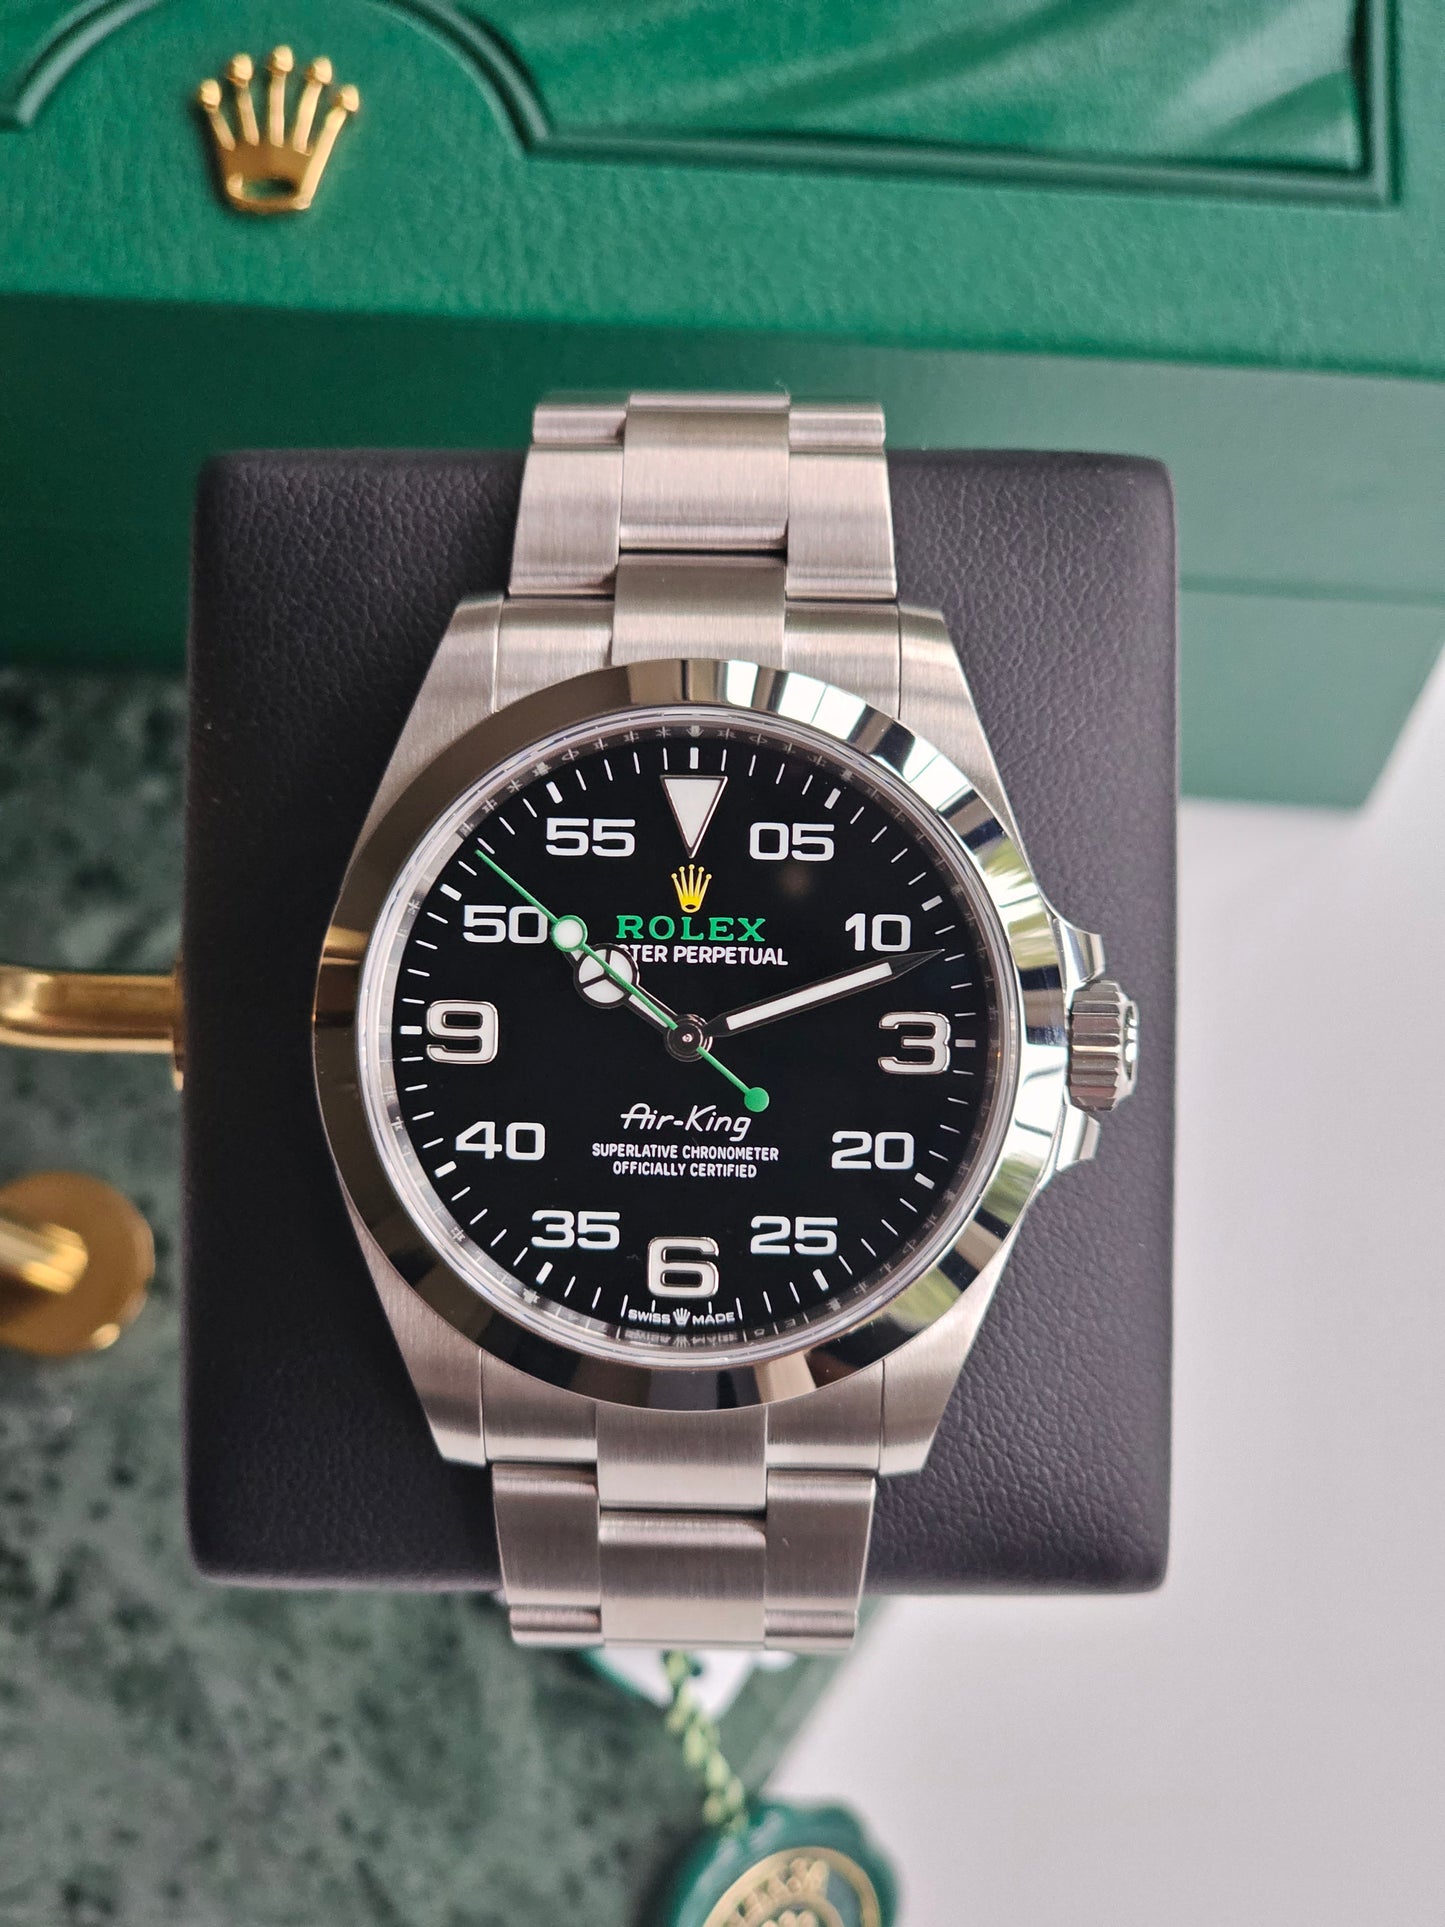 Rolex AirKing watch 126900, on a watch stand, time showing ten past ten. Watch angled straight on. Part of the green rolex box showing in the background